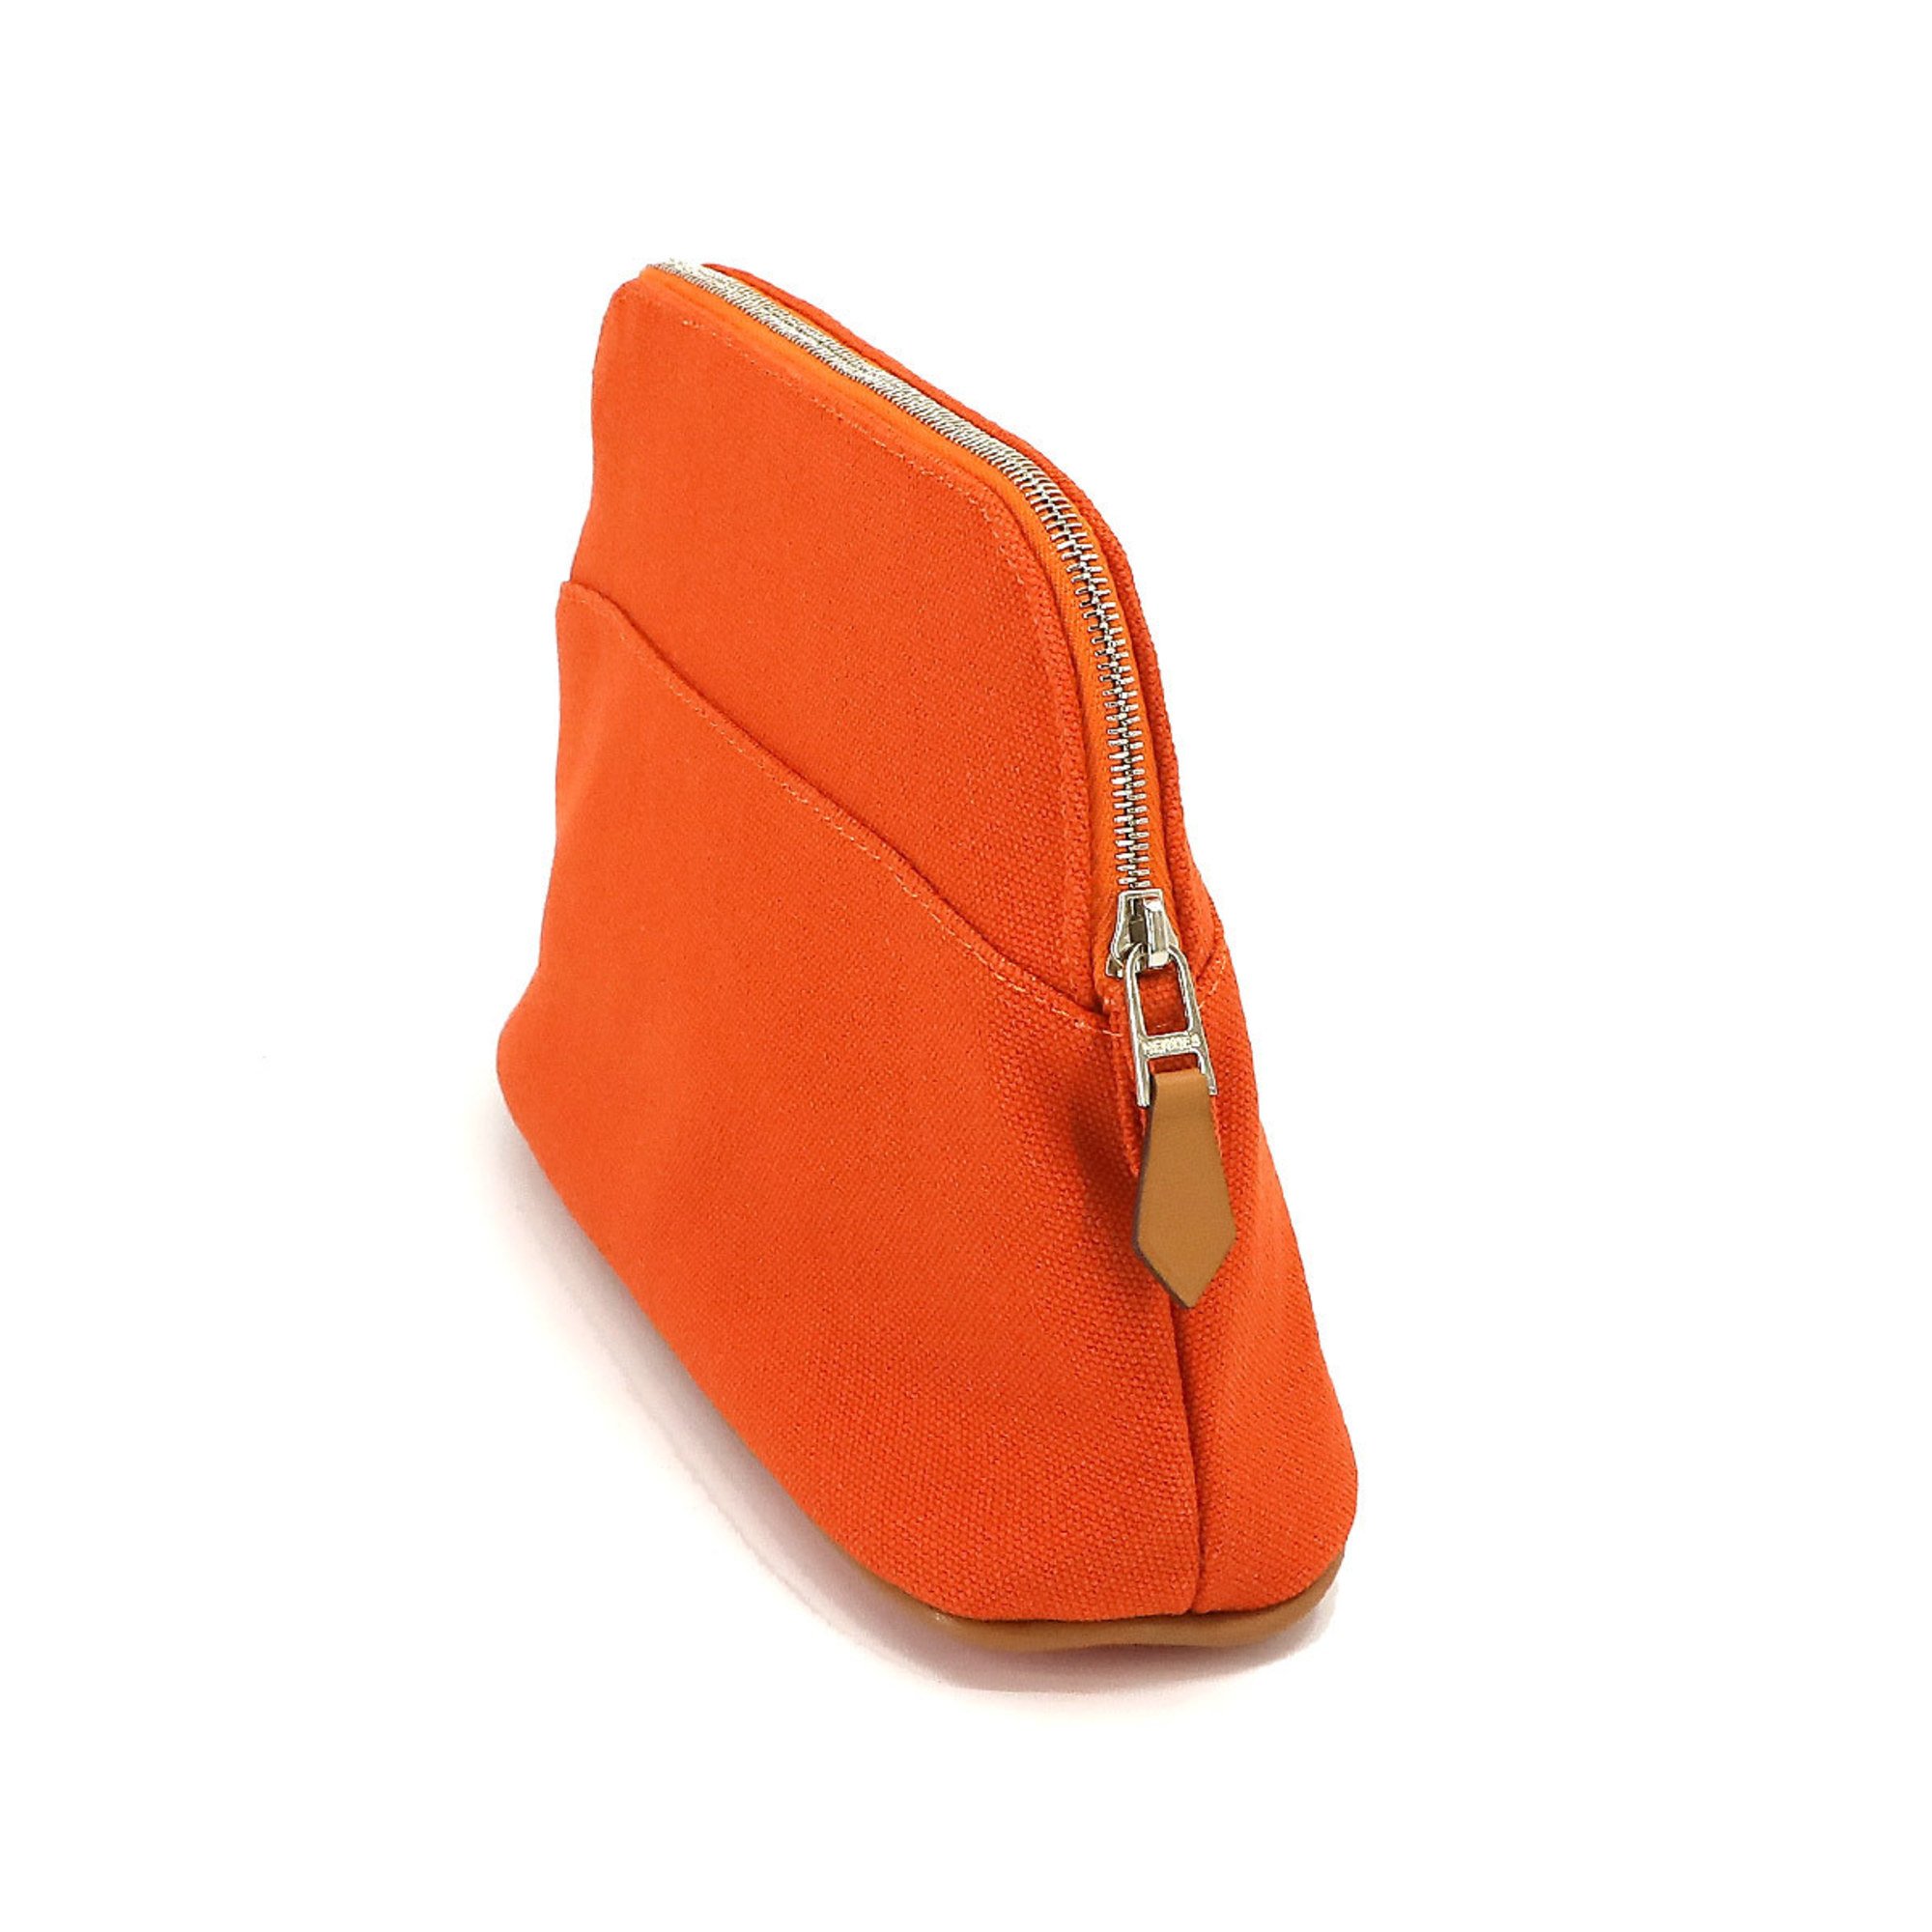 Hermes Bolide Pouch Cotton Canvas Leather Orange Silver Hardware